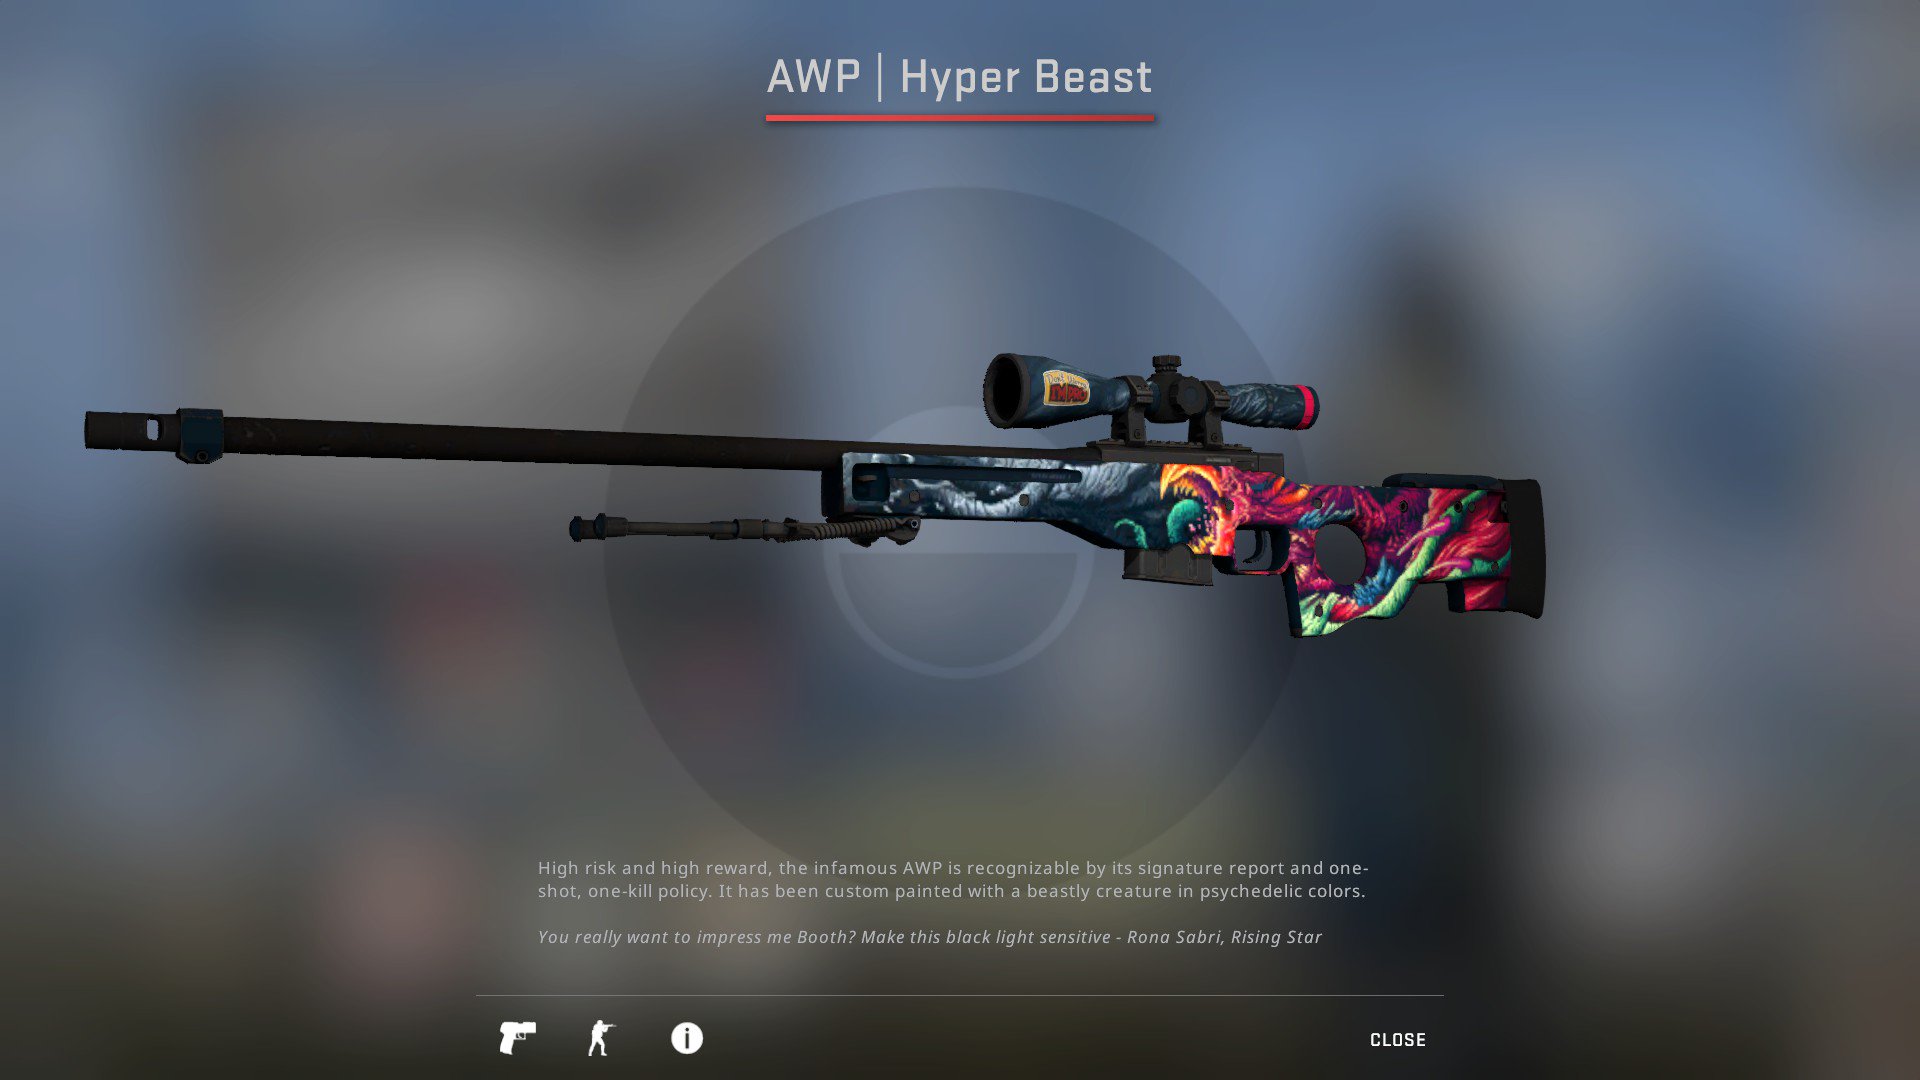 Jeffrey on X: 🔥CS:GO GIVEAWAY🔥 🎁AWP  Atheris (MW) ➡️TO ENTER; ✓Follow  me: @codejefo 🔁Retweet + Like 🔗LIKE & SUB + WATCH THE VIDEO:   (show proof) ⌛️GİVEAWAY ENDS IN 4 DAYS